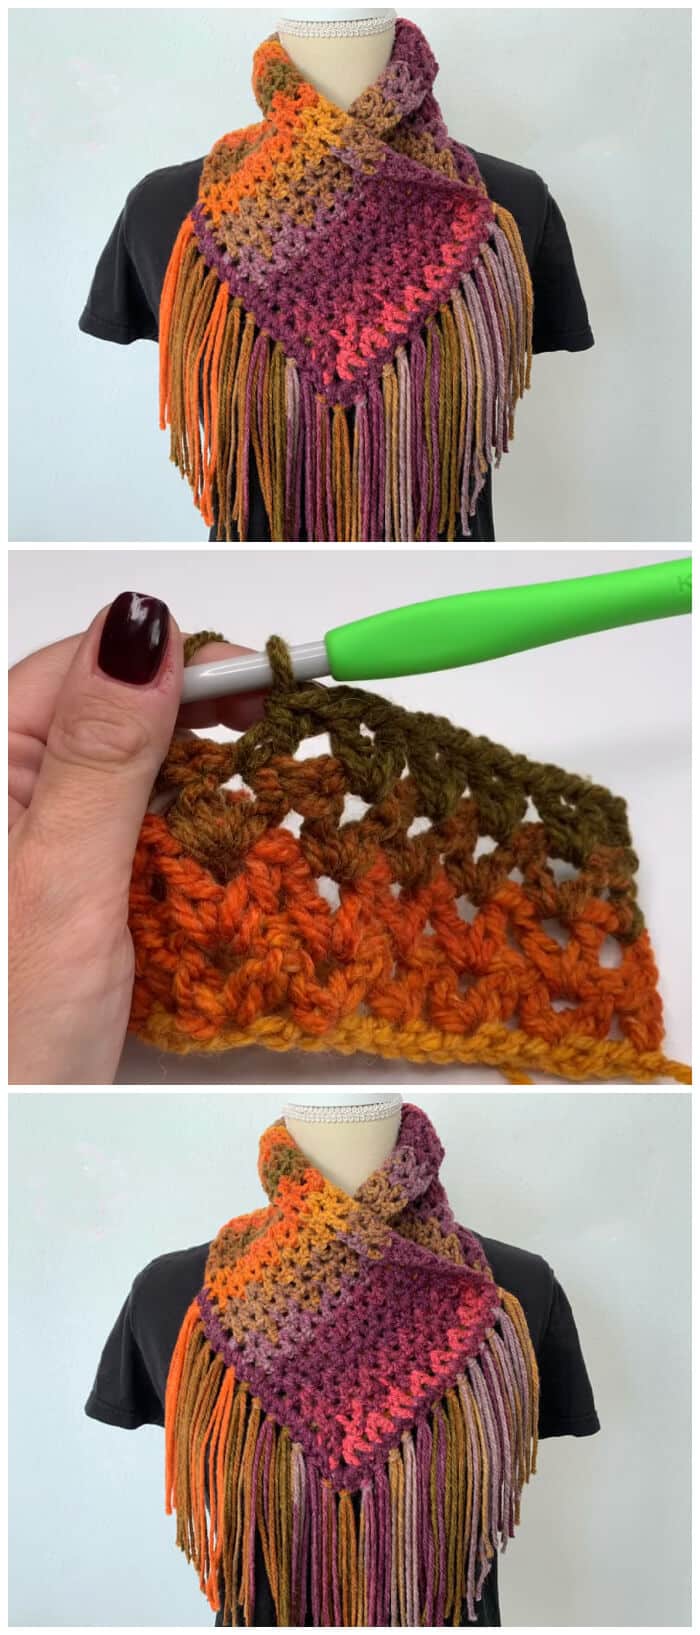 Learn how to crochet this Crochet Cowl For Beginners. This is a absolute beginner Crochet Tutorial and learn to hold the yarn and hook before beginning this project.